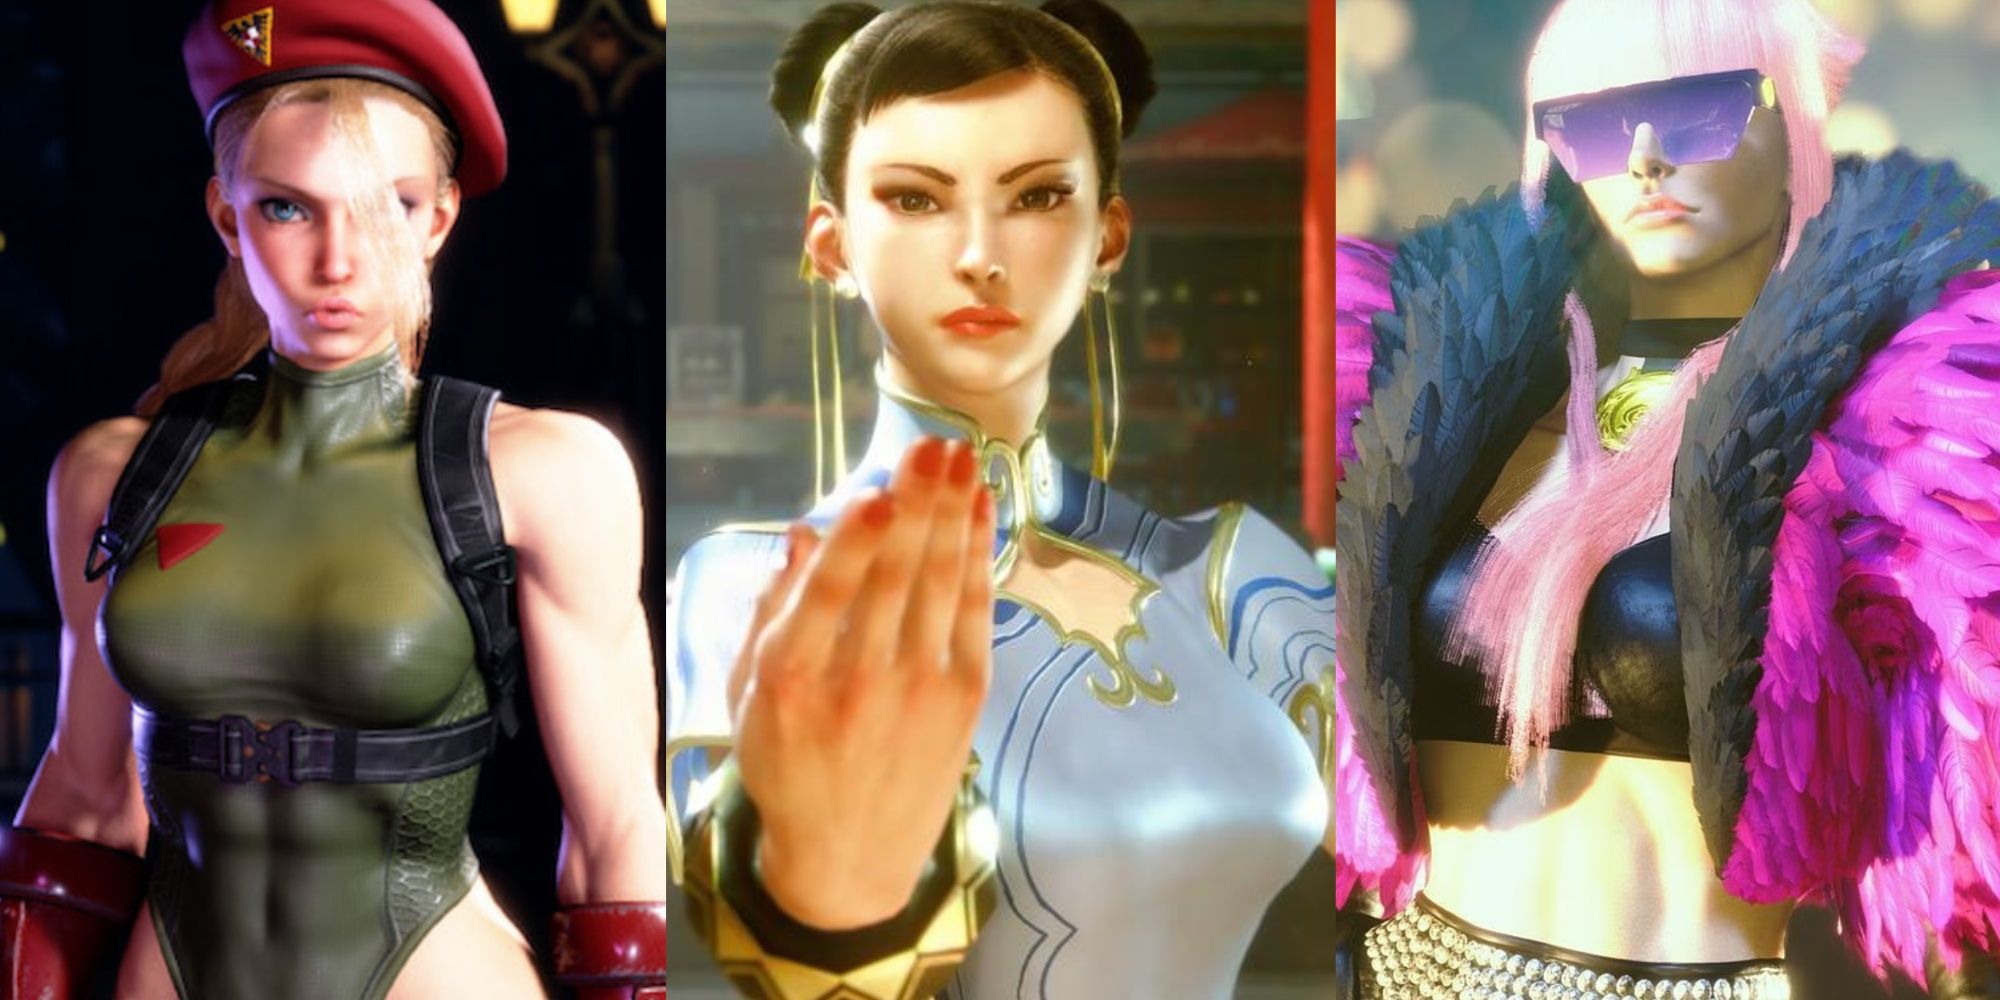 Street Fighter 6 Reveals Awesome Upcoming Costumes for Guile, Juri, Marisa,  & Dee Jay